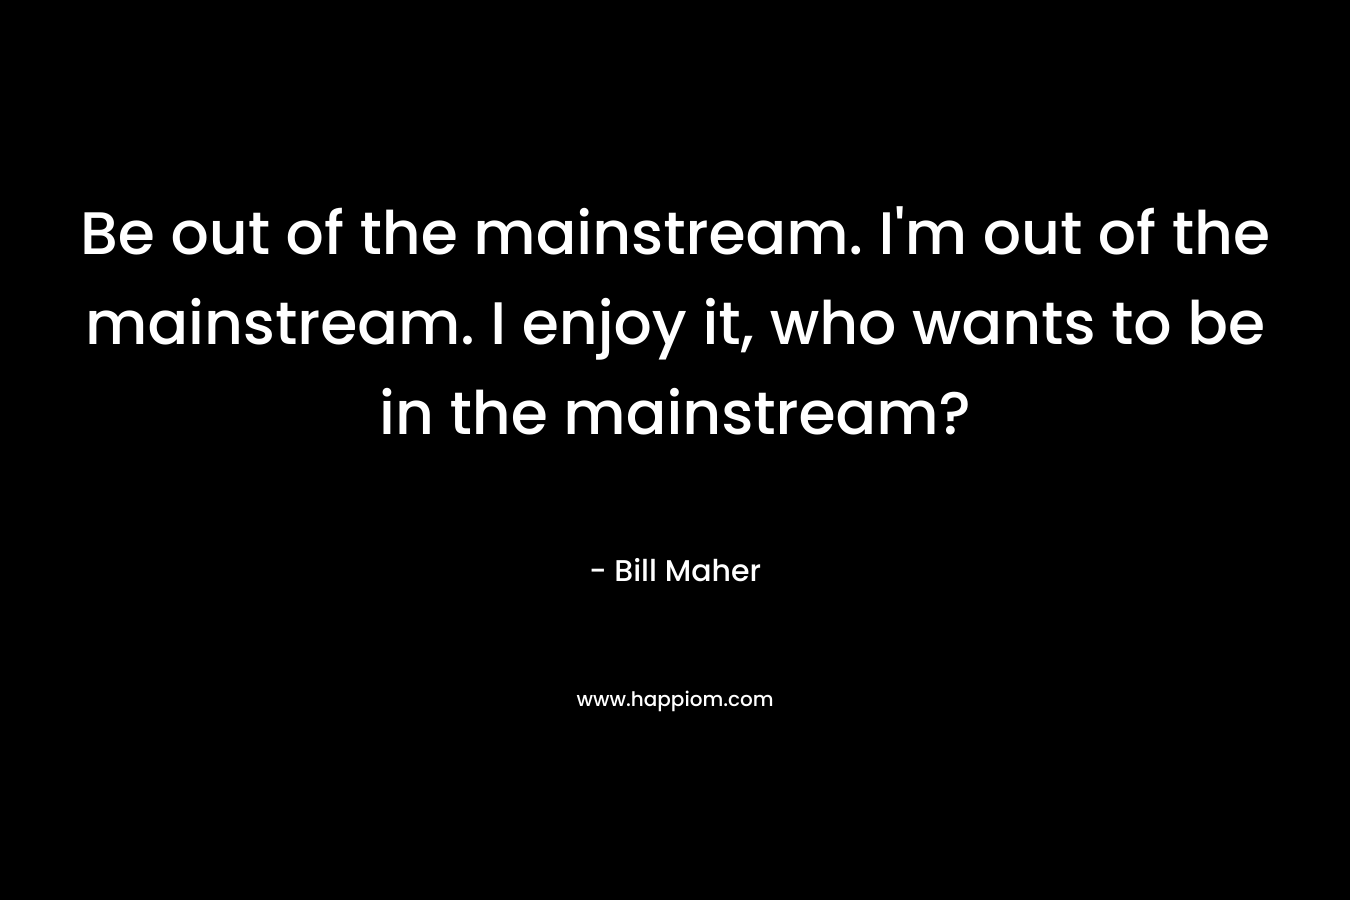 Be out of the mainstream. I'm out of the mainstream. I enjoy it, who wants to be in the mainstream?